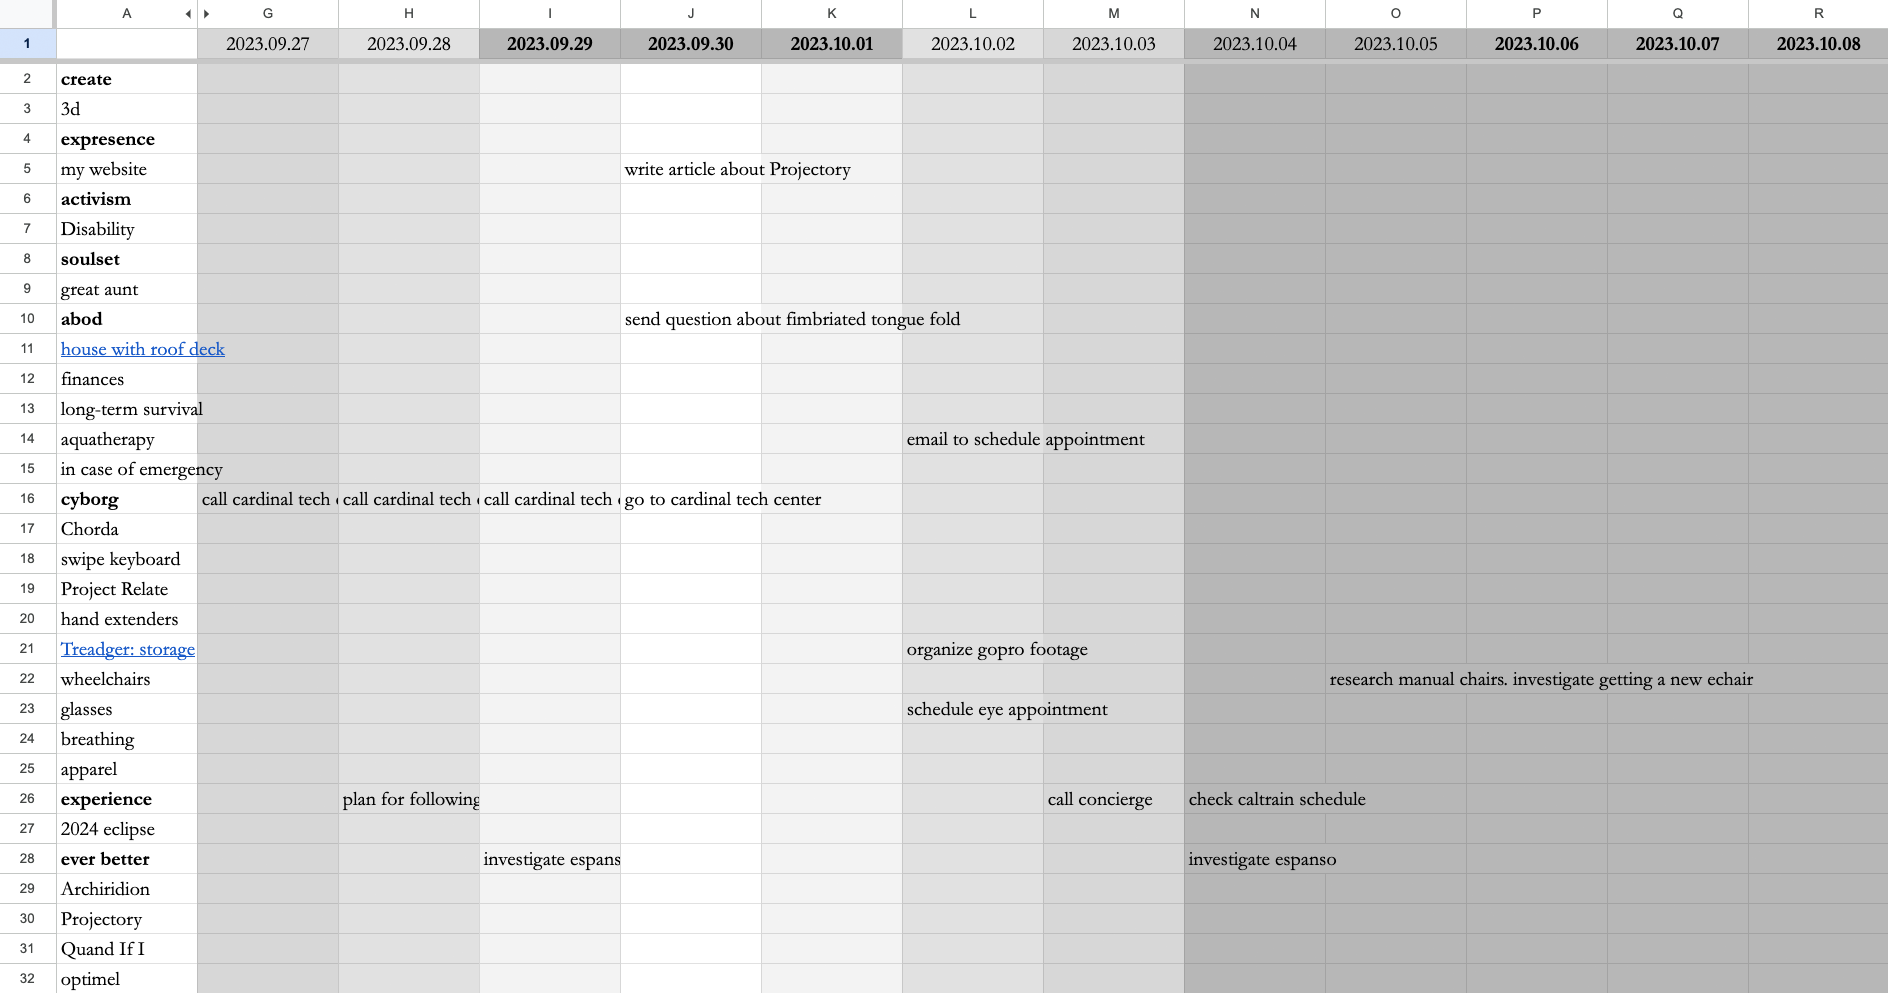 Spreadsheet with dates along the top and projects down the left. Some cells in the middle have tasks in them. For example, J1 contains 2023.09.30, A5 contains “my website”, and J5 contains “write article about Projectory”. Other tasks are about going to the cardinal tech center, scheduling aquatherapy and eye appointments, organizing gopro footage, investigating espanso, and researching manual chairs and echairs.